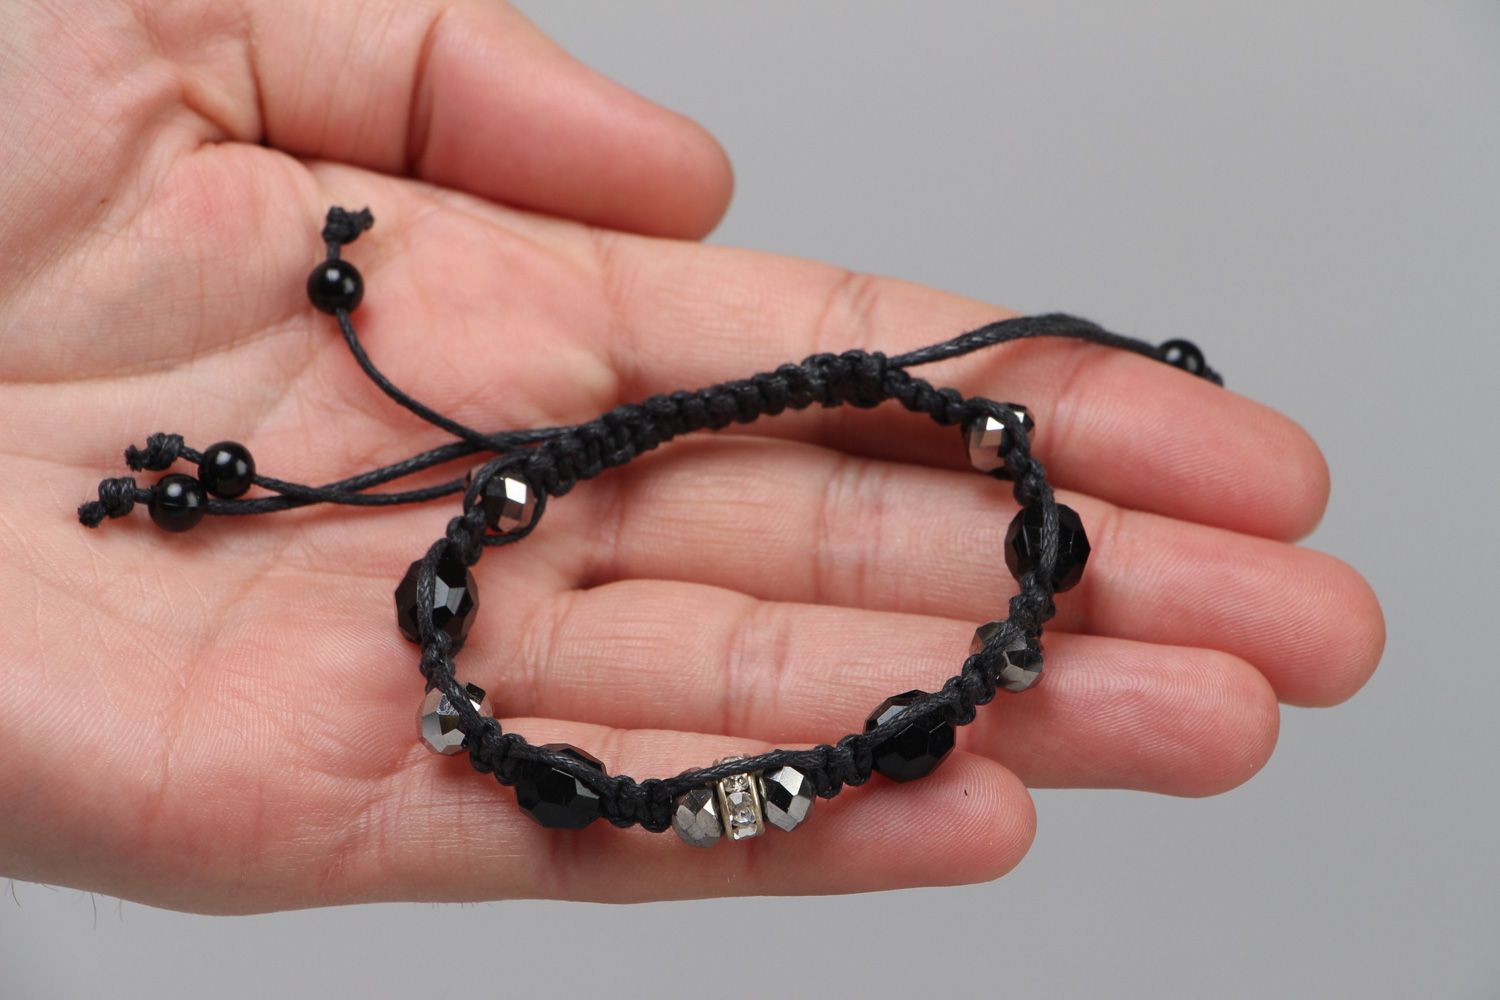 Handmade wrist bracelet woven of waxed cord with glass beads in dark color palette photo 3